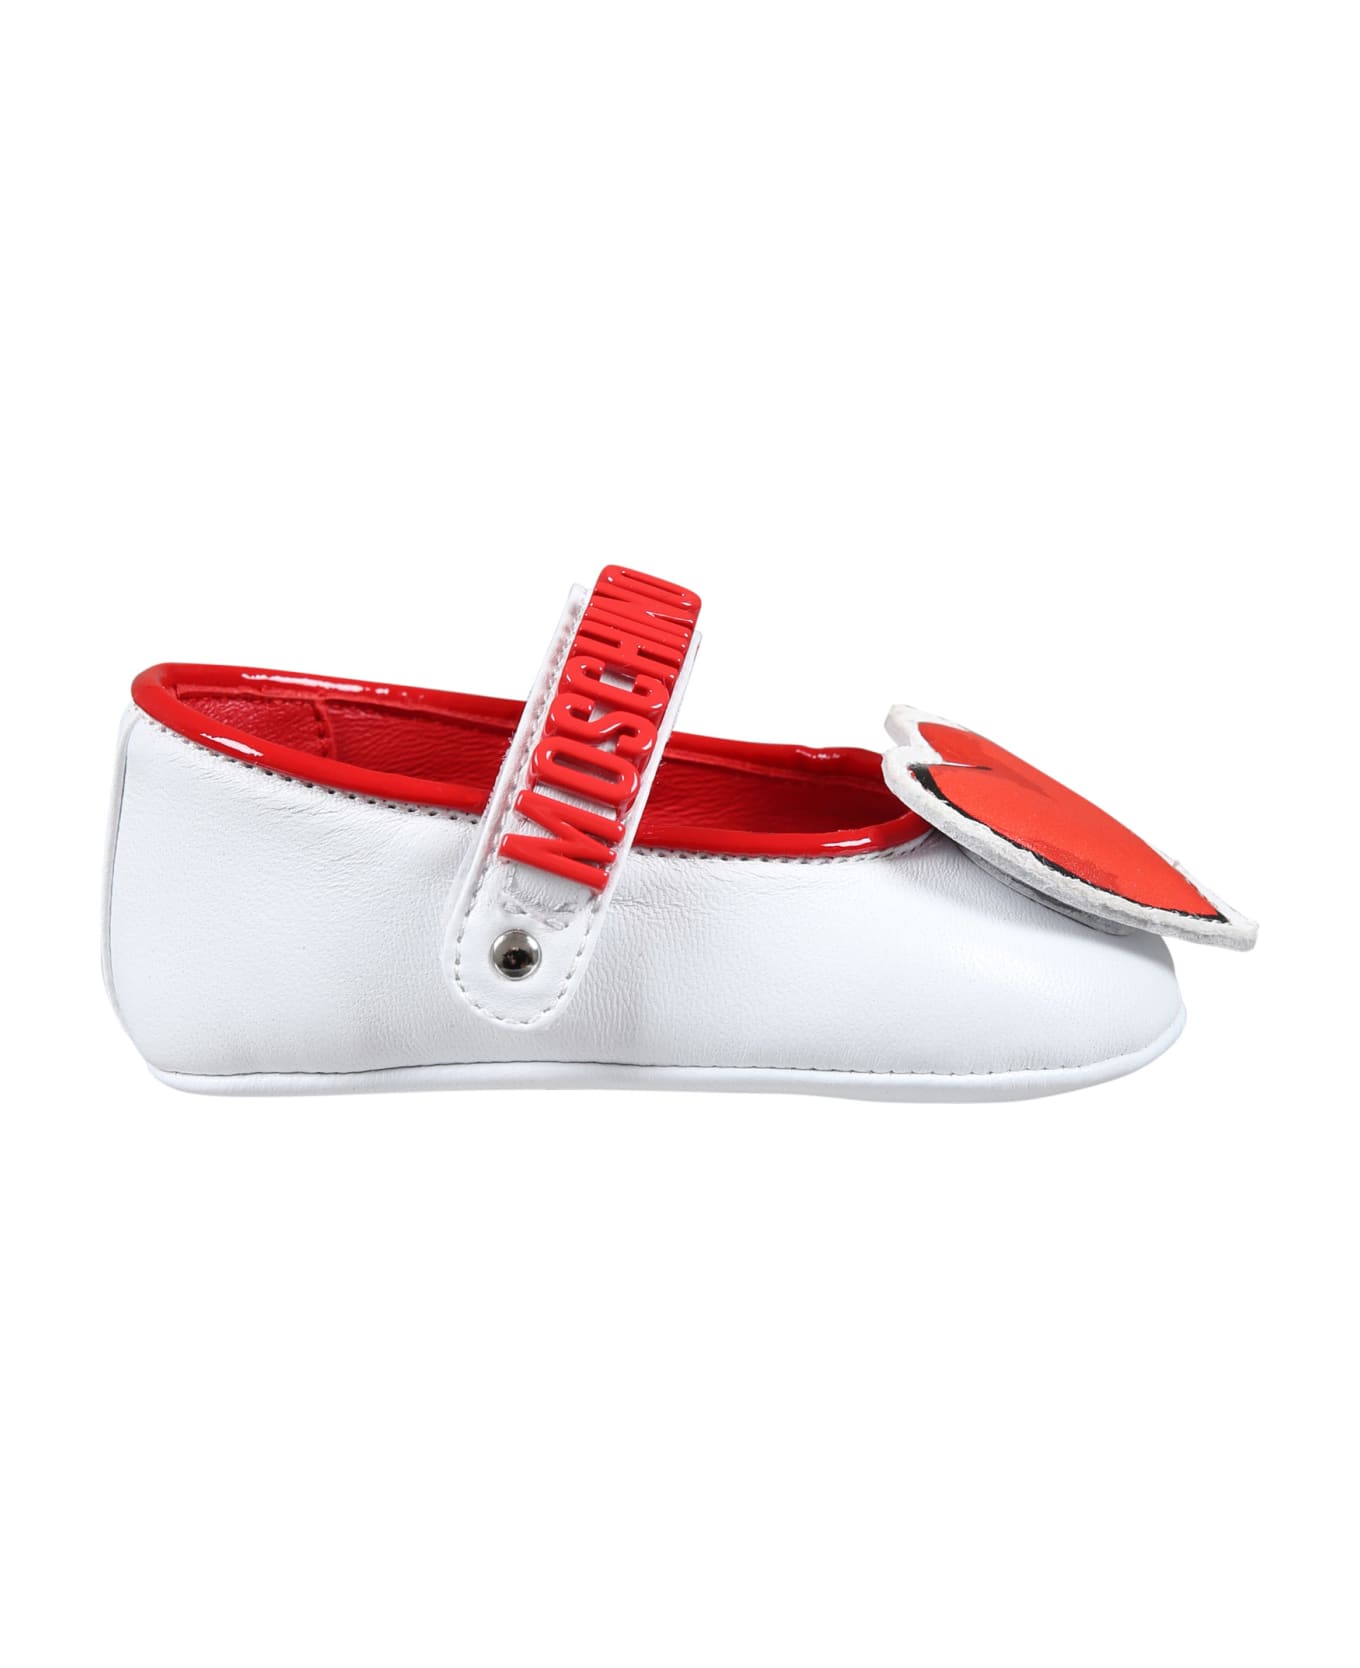 Moschino White Ballet Flats For Baby Girl With Heart - White